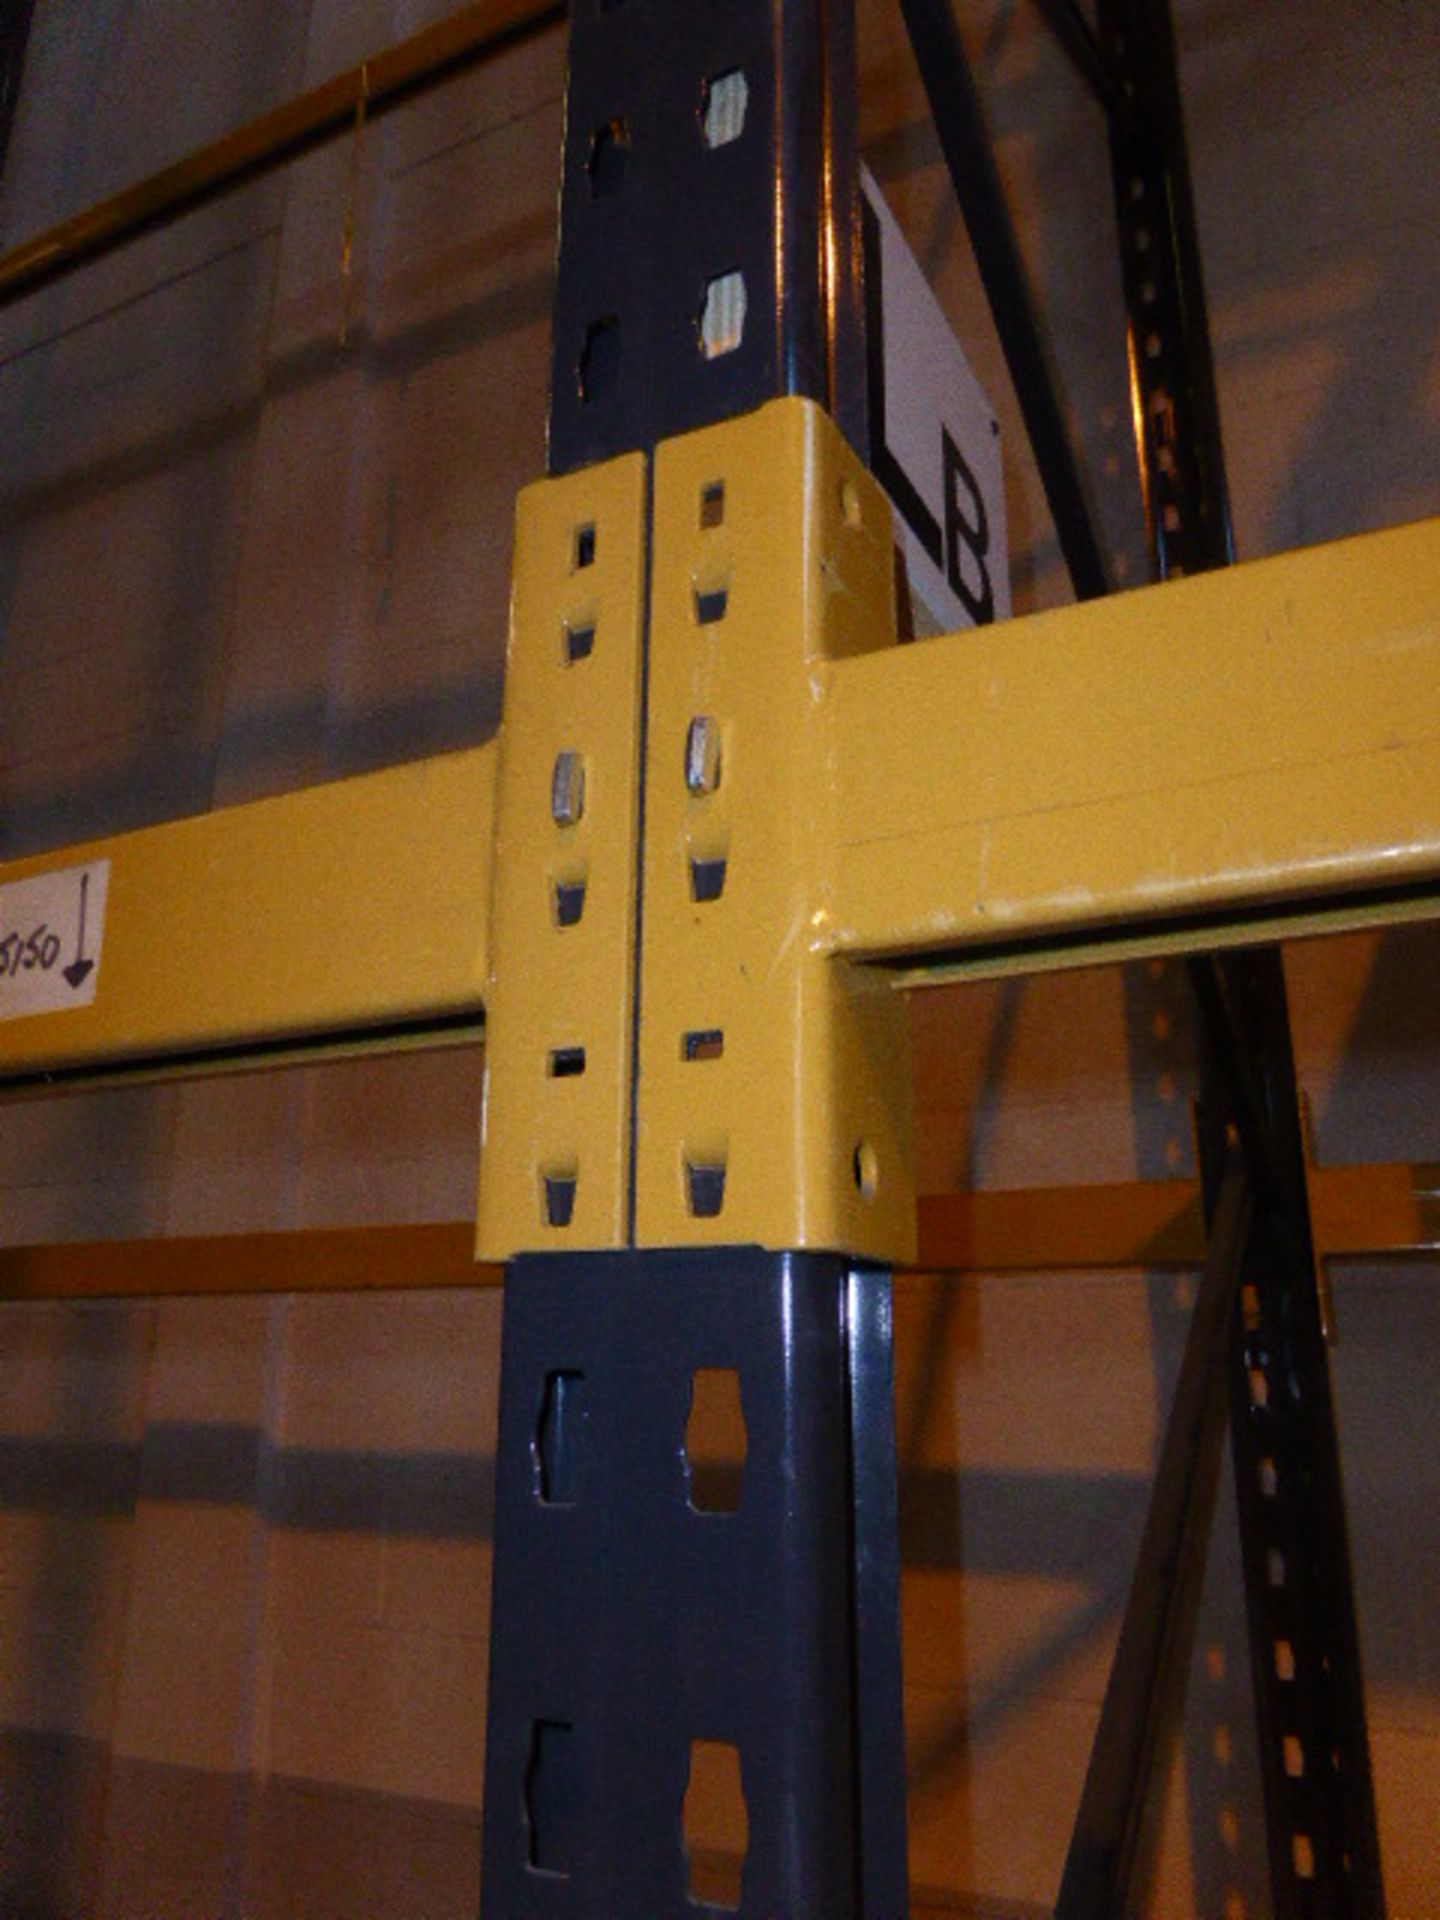 Link 51 model H pallet racking in the first warehouse in brown and yellow finish assembled in 20 - Image 3 of 9